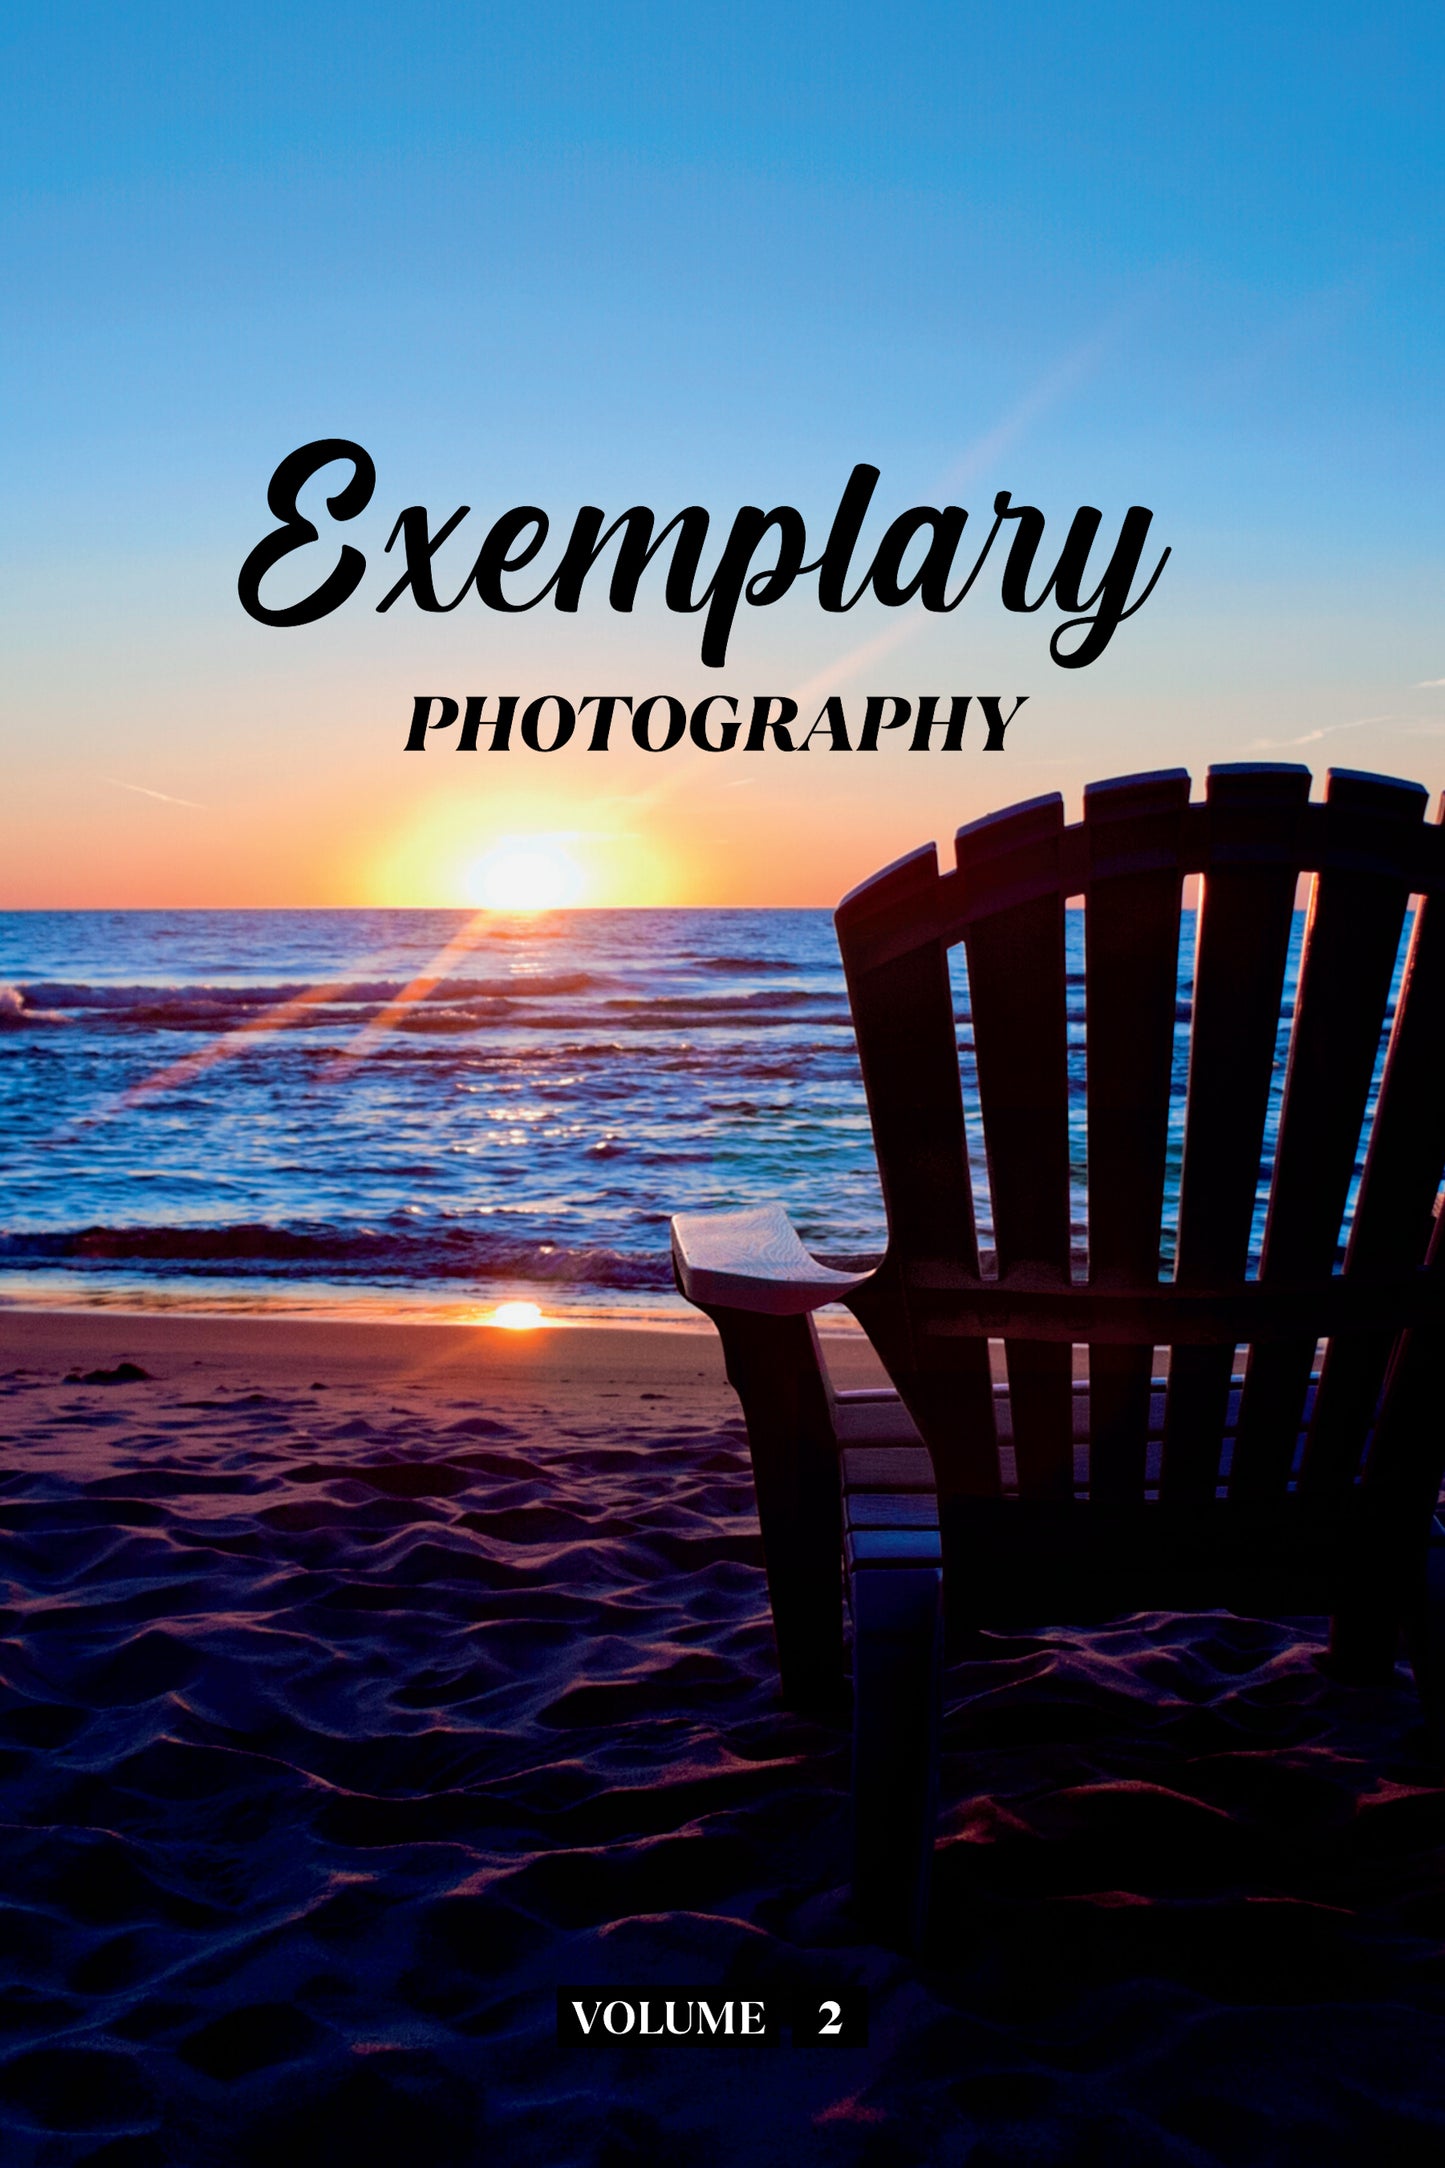 Exemplary Photography Volume 2 (Physical Book)